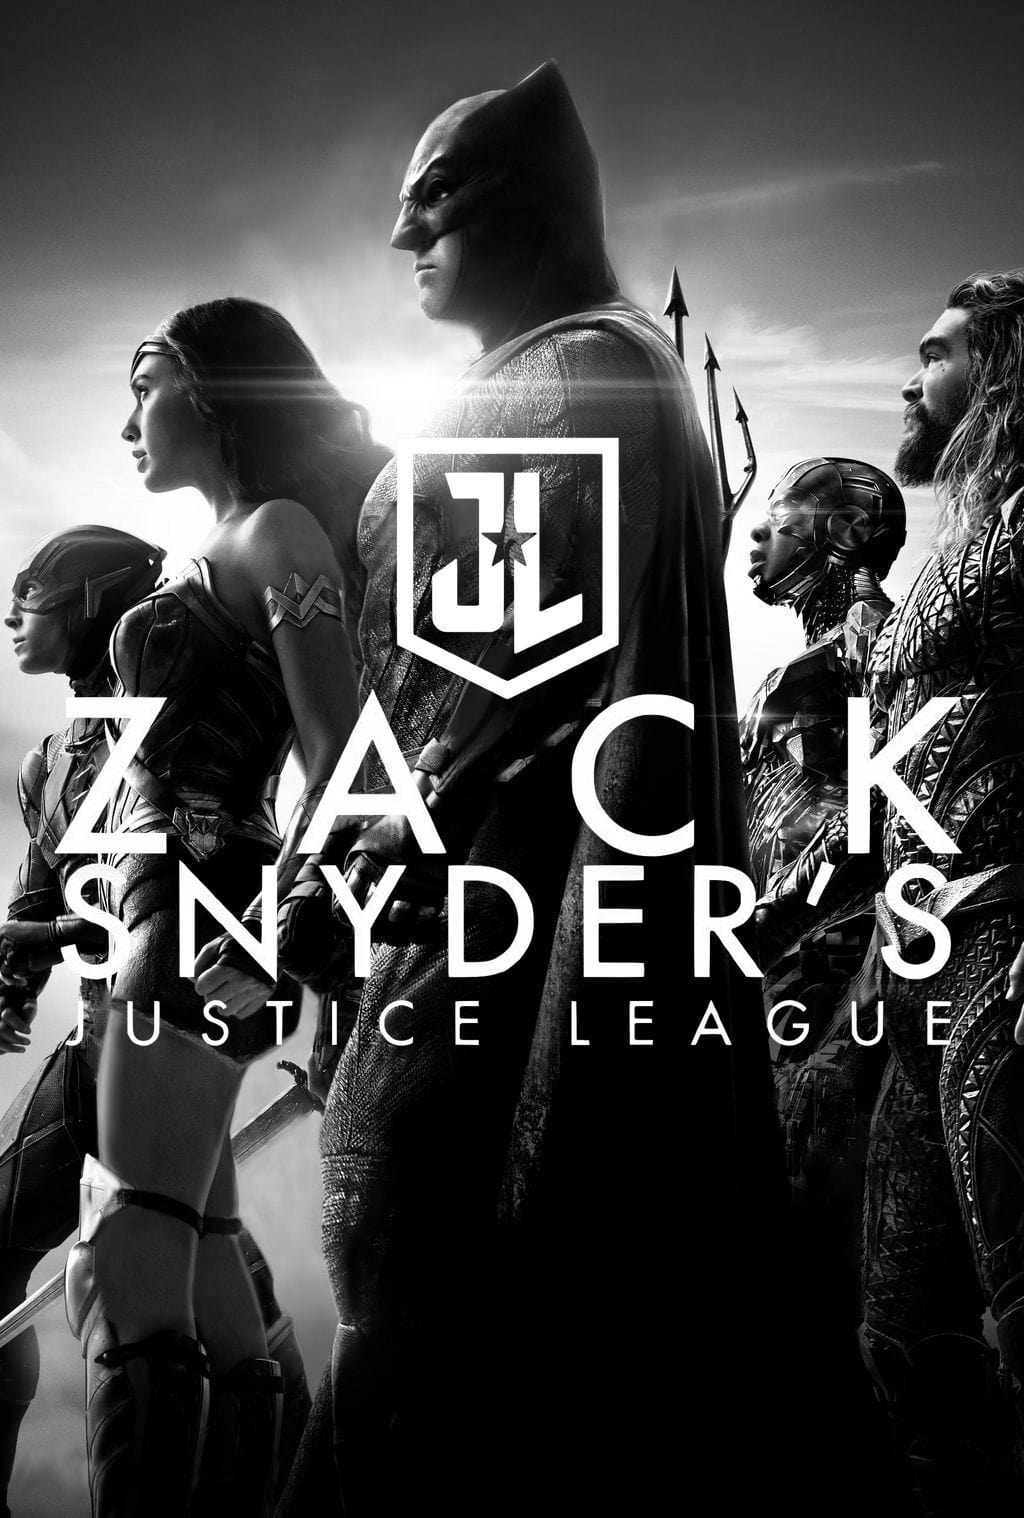 Zack Snyder's Justice League